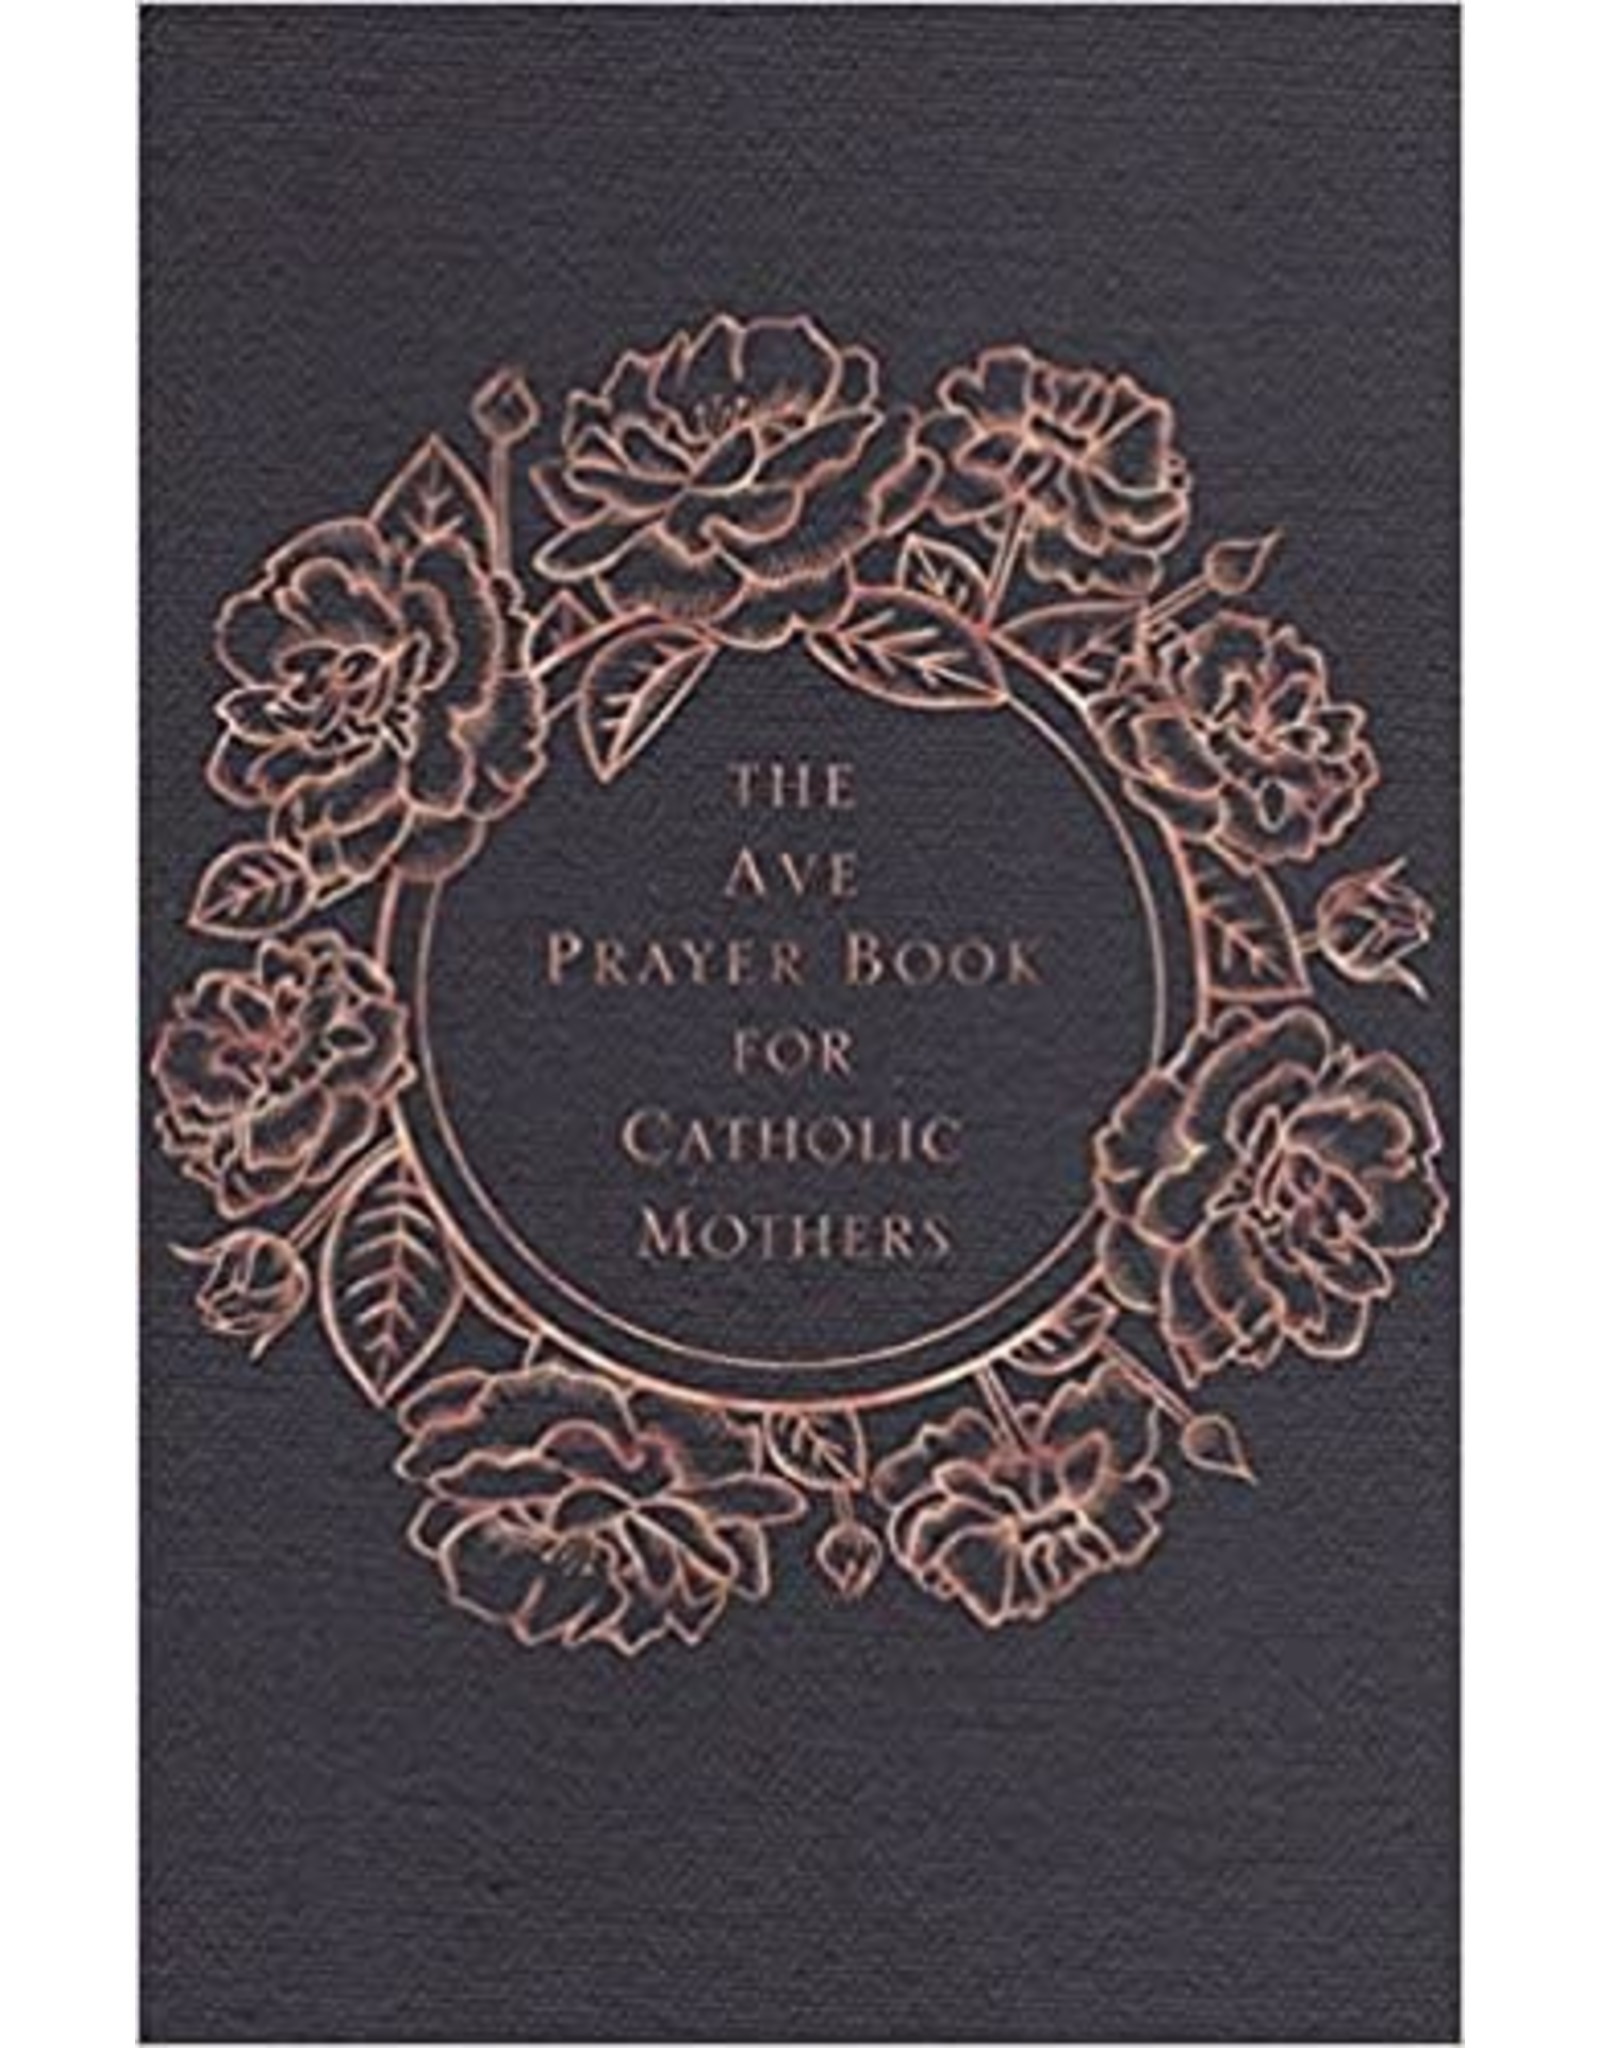 The Ave Prayer Book for Catholic Mothers Hardcover